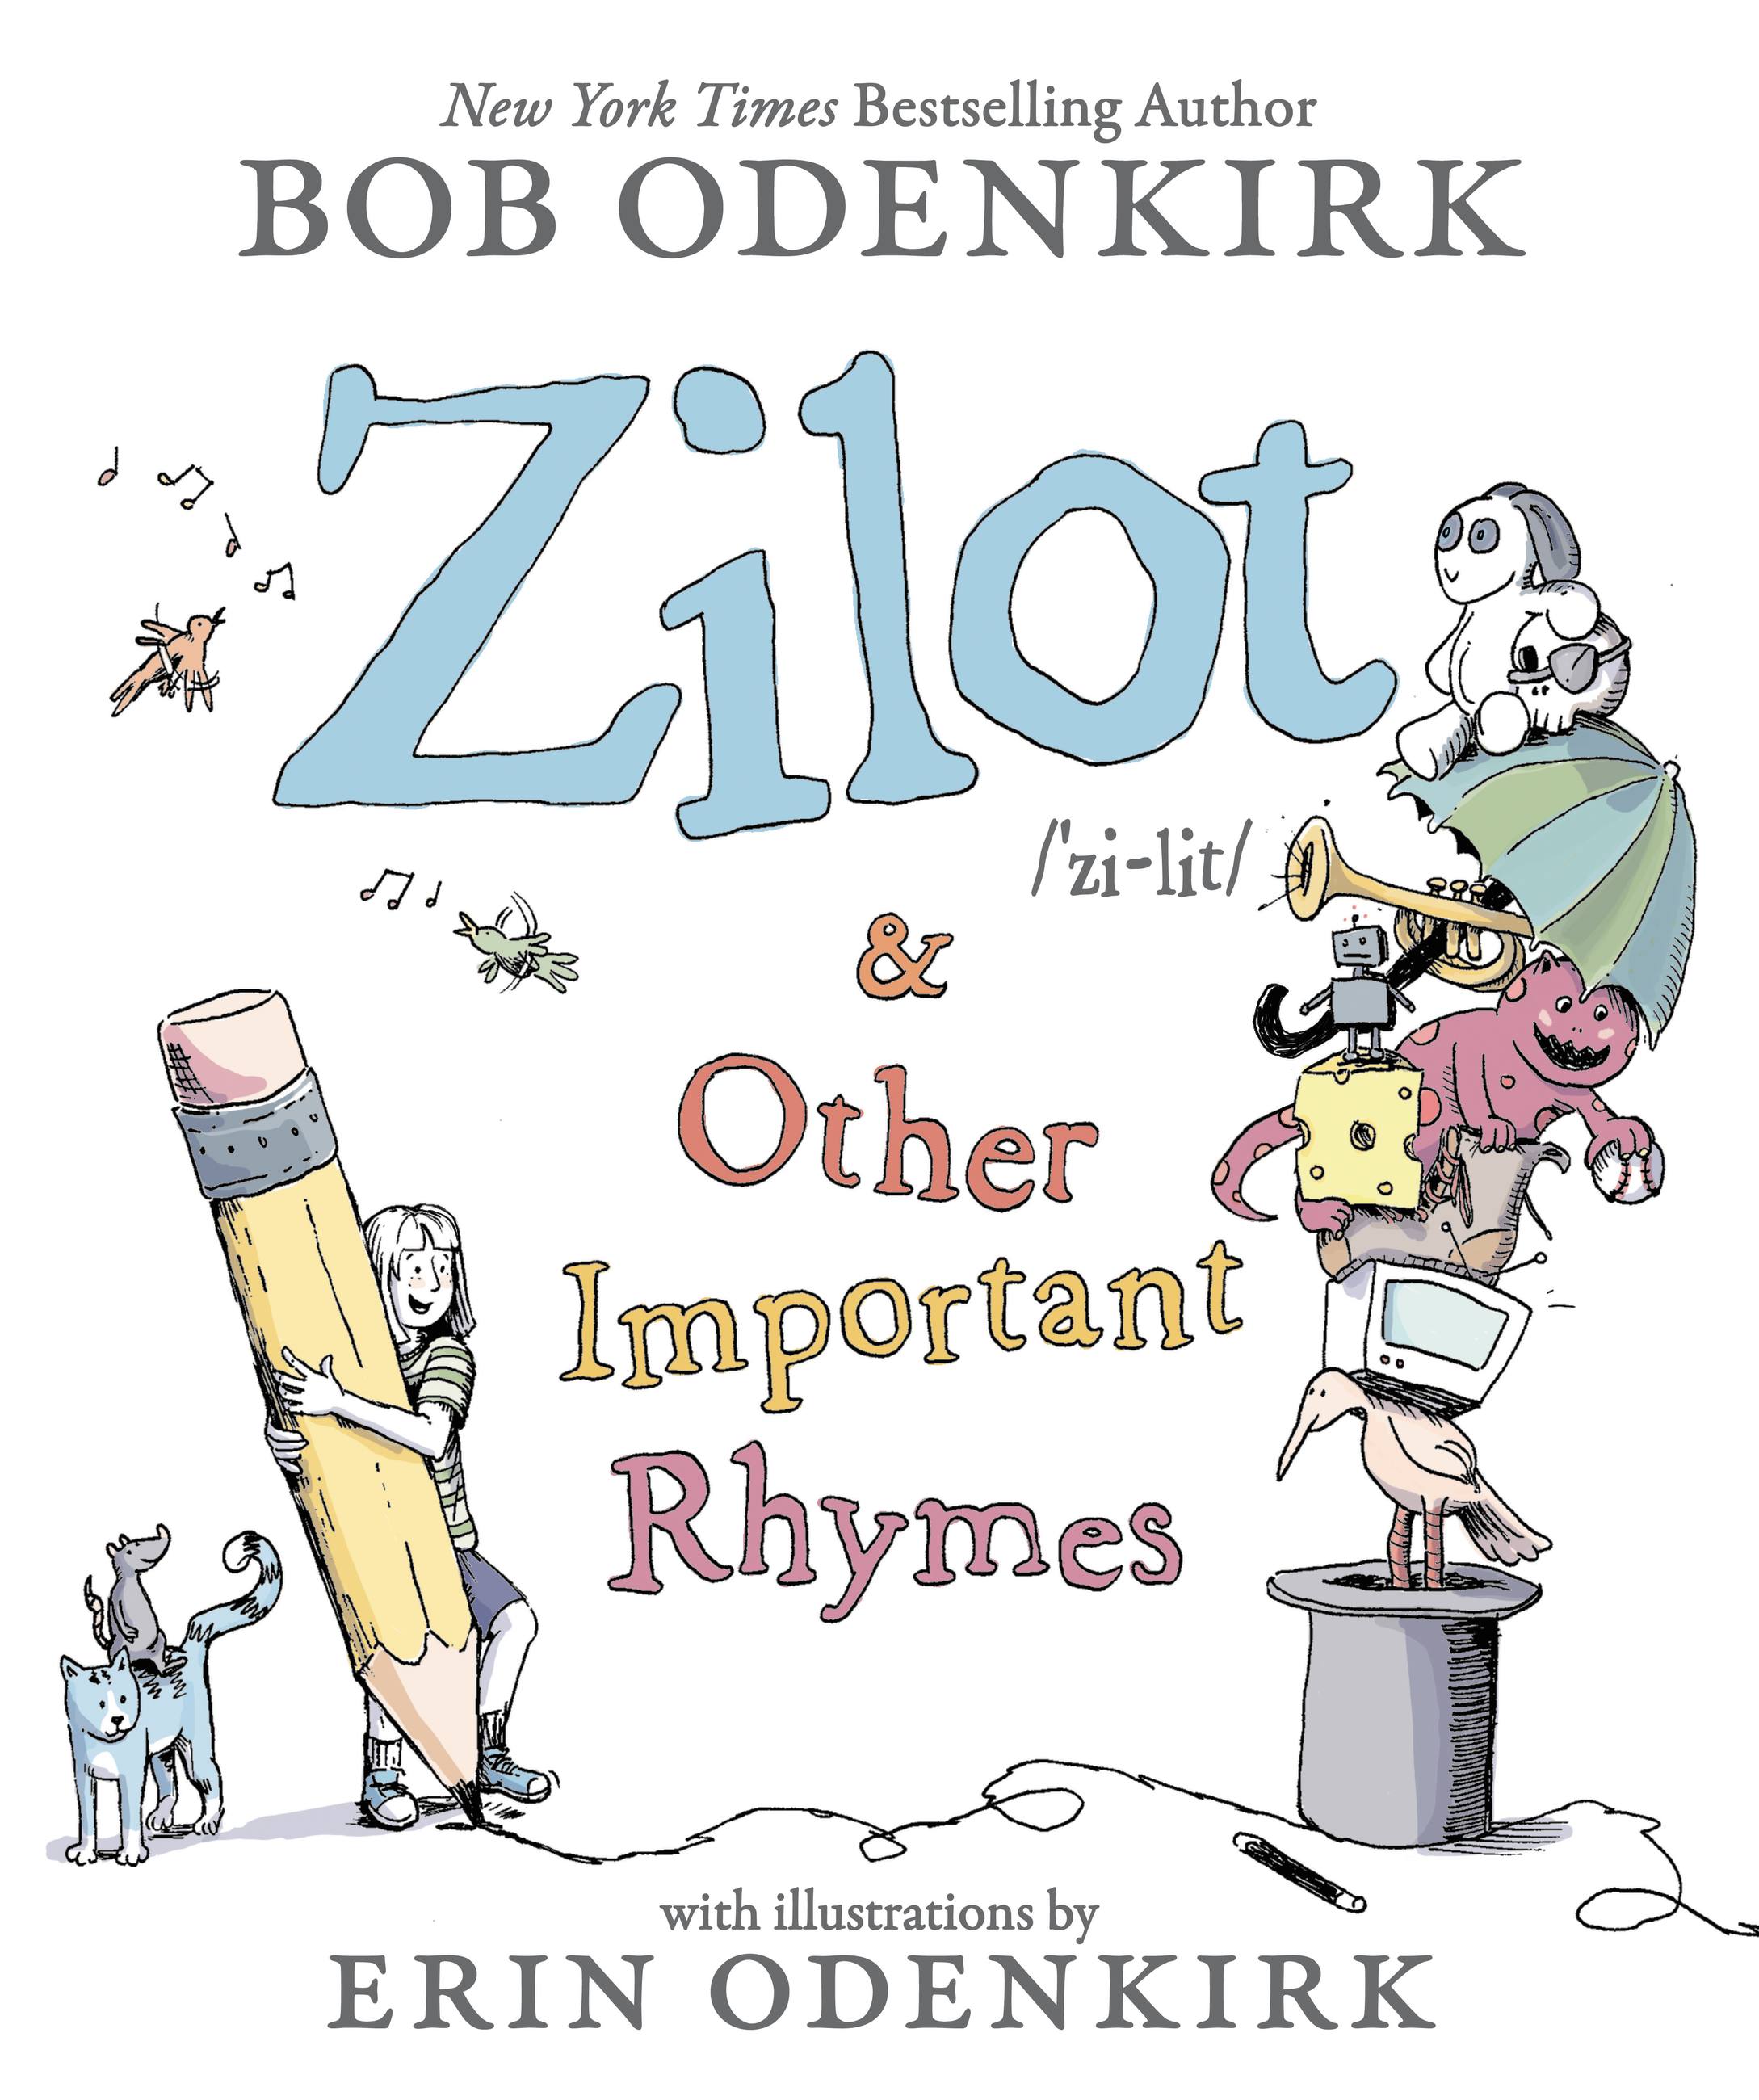 Zilot & Other Important Rhymes by Bob Odenkirk Hachette Book Group